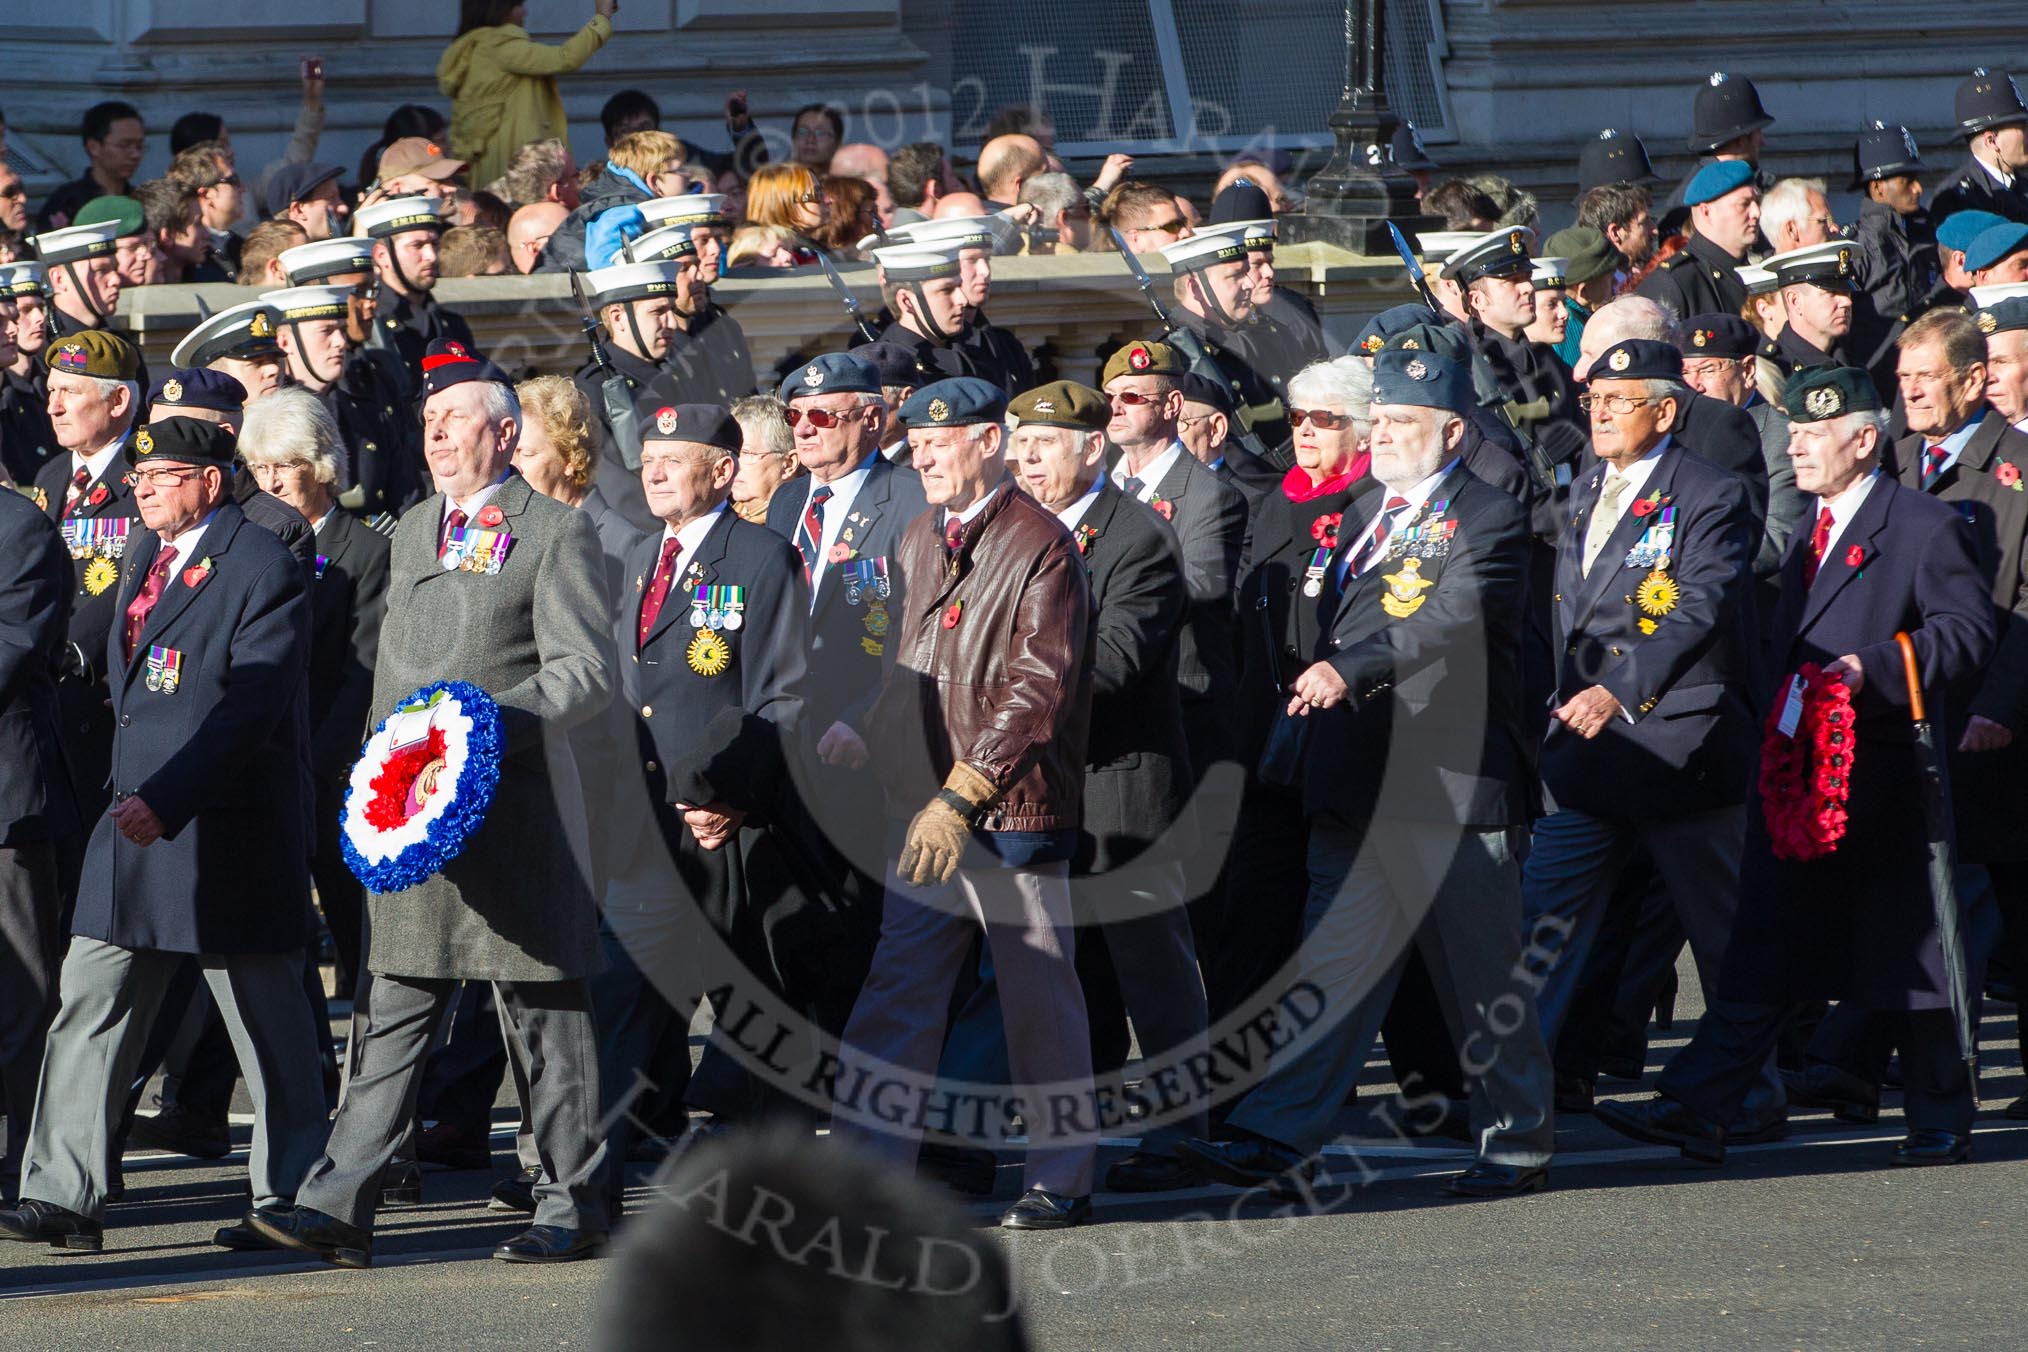 Remembrance Sunday 2012 Cenotaph March Past: Group F2 - Aden Veterans Association..
Whitehall, Cenotaph,
London SW1,

United Kingdom,
on 11 November 2012 at 11:45, image #389